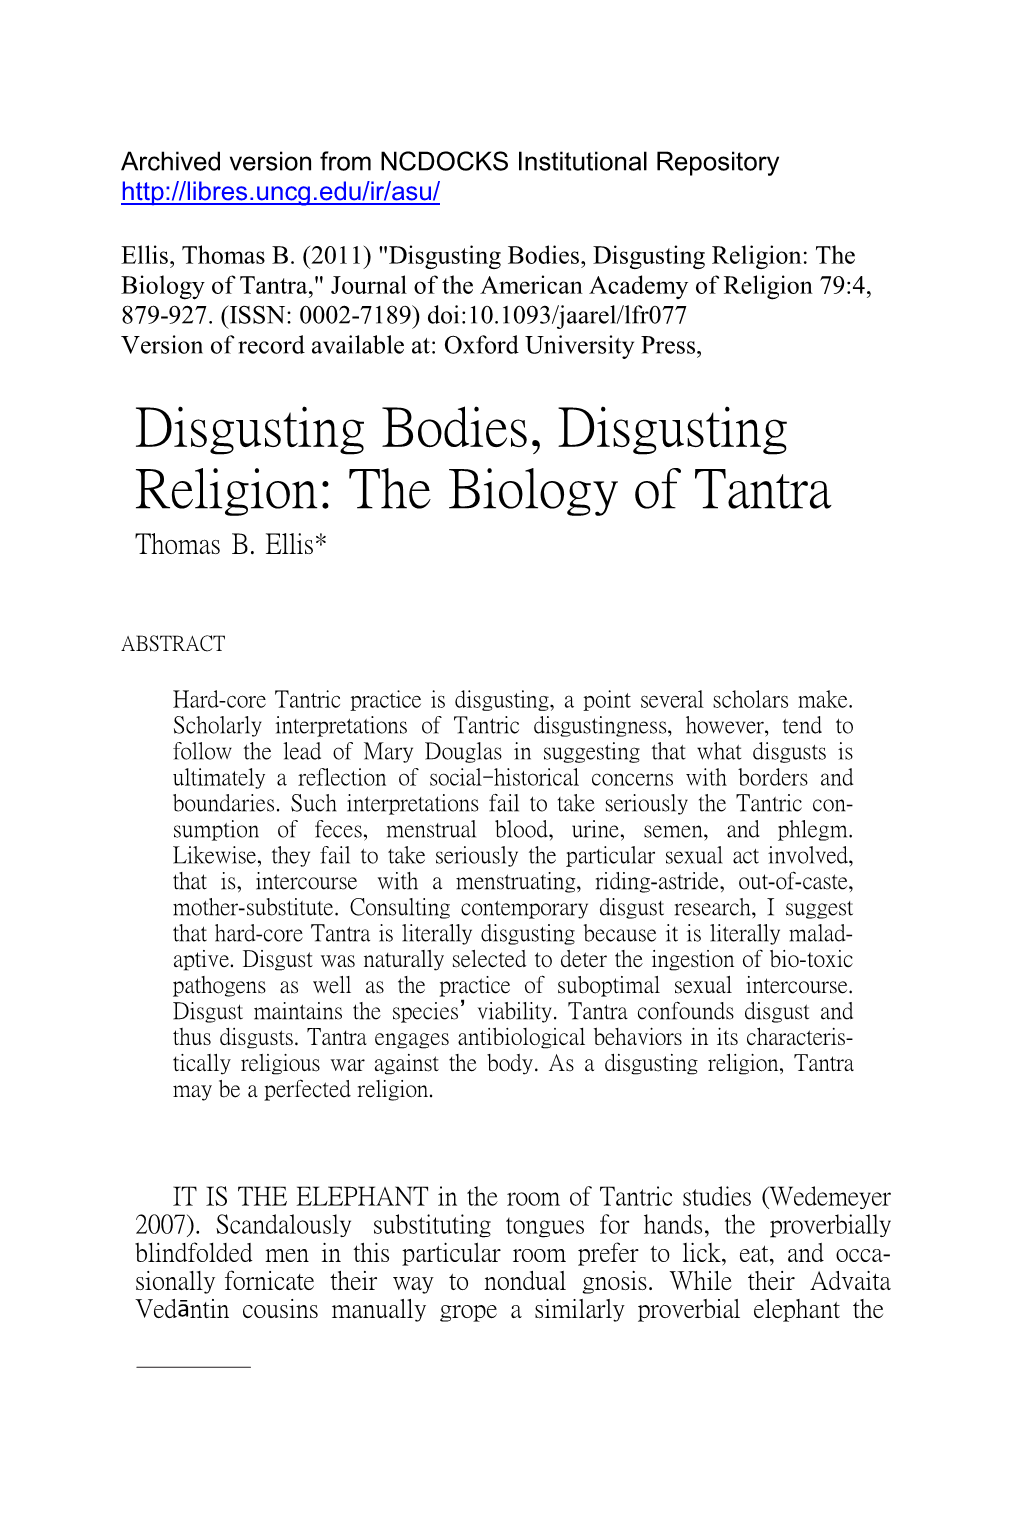 Disgusting Bodies, Disgusting Religion: the Biology of Tantra," Journal of the American Academy of Religion 79:4, 879-927